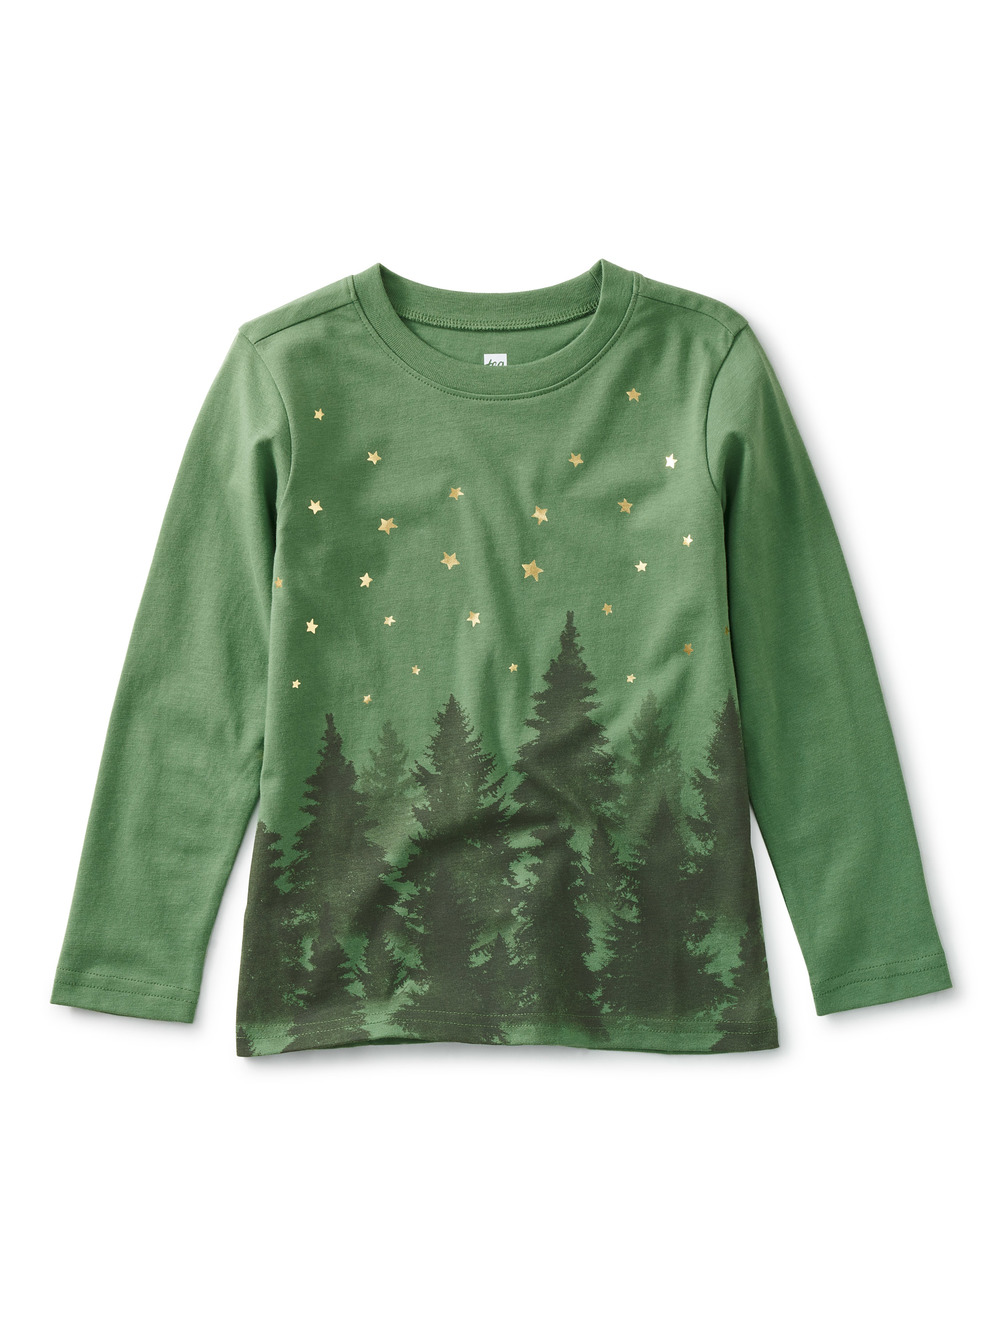 Lapland Forest Graphic Tee